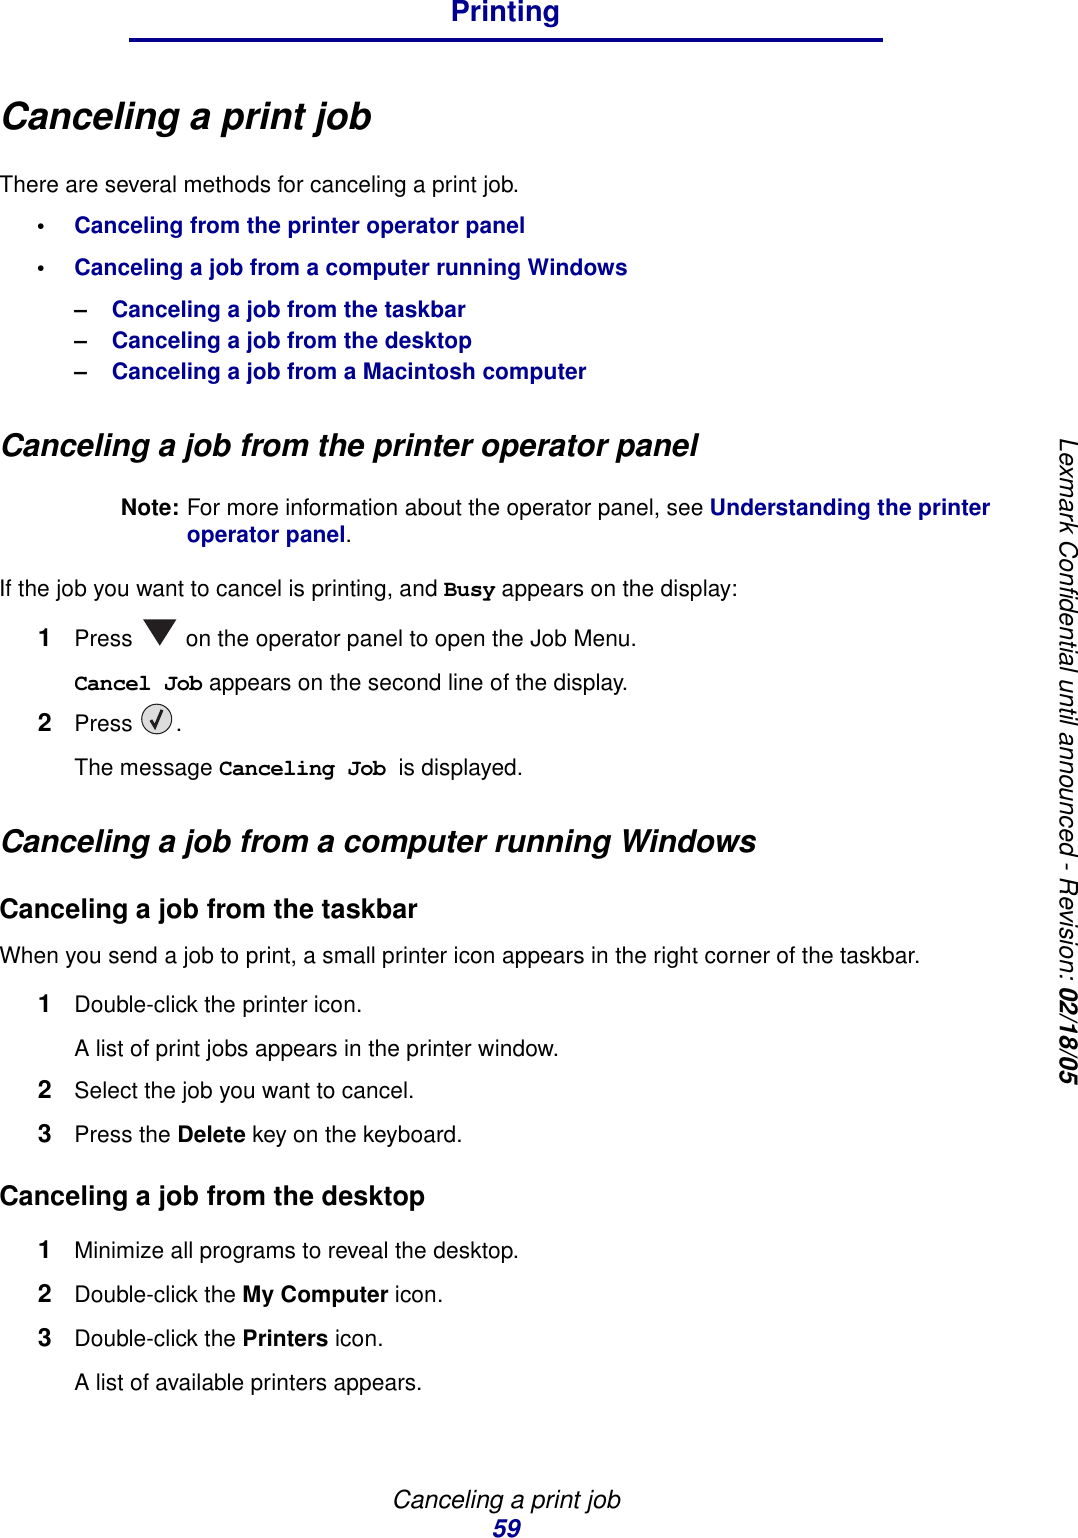 Canceling a print job59PrintingLexmark Confidential until announced - Revision: 02/18/05Canceling a print jobThere are several methods for canceling a print job.•Canceling from the printer operator panel•Canceling a job from a computer running Windows–Canceling a job from the taskbar–Canceling a job from the desktop–Canceling a job from a Macintosh computerCanceling a job from the printer operator panelNote: For more information about the operator panel, see Understanding the printer operator panel.If the job you want to cancel is printing, and Busy appears on the display:1Press   on the operator panel to open the Job Menu.Cancel Job appears on the second line of the display.2Press .The message Canceling Job is displayed.Canceling a job from a computer running WindowsCanceling a job from the taskbarWhen you send a job to print, a small printer icon appears in the right corner of the taskbar.1Double-click the printer icon. A list of print jobs appears in the printer window.2Select the job you want to cancel.3Press the Delete key on the keyboard.Canceling a job from the desktop1Minimize all programs to reveal the desktop.2Double-click the My Computer icon.3Double-click the Printers icon.A list of available printers appears. 